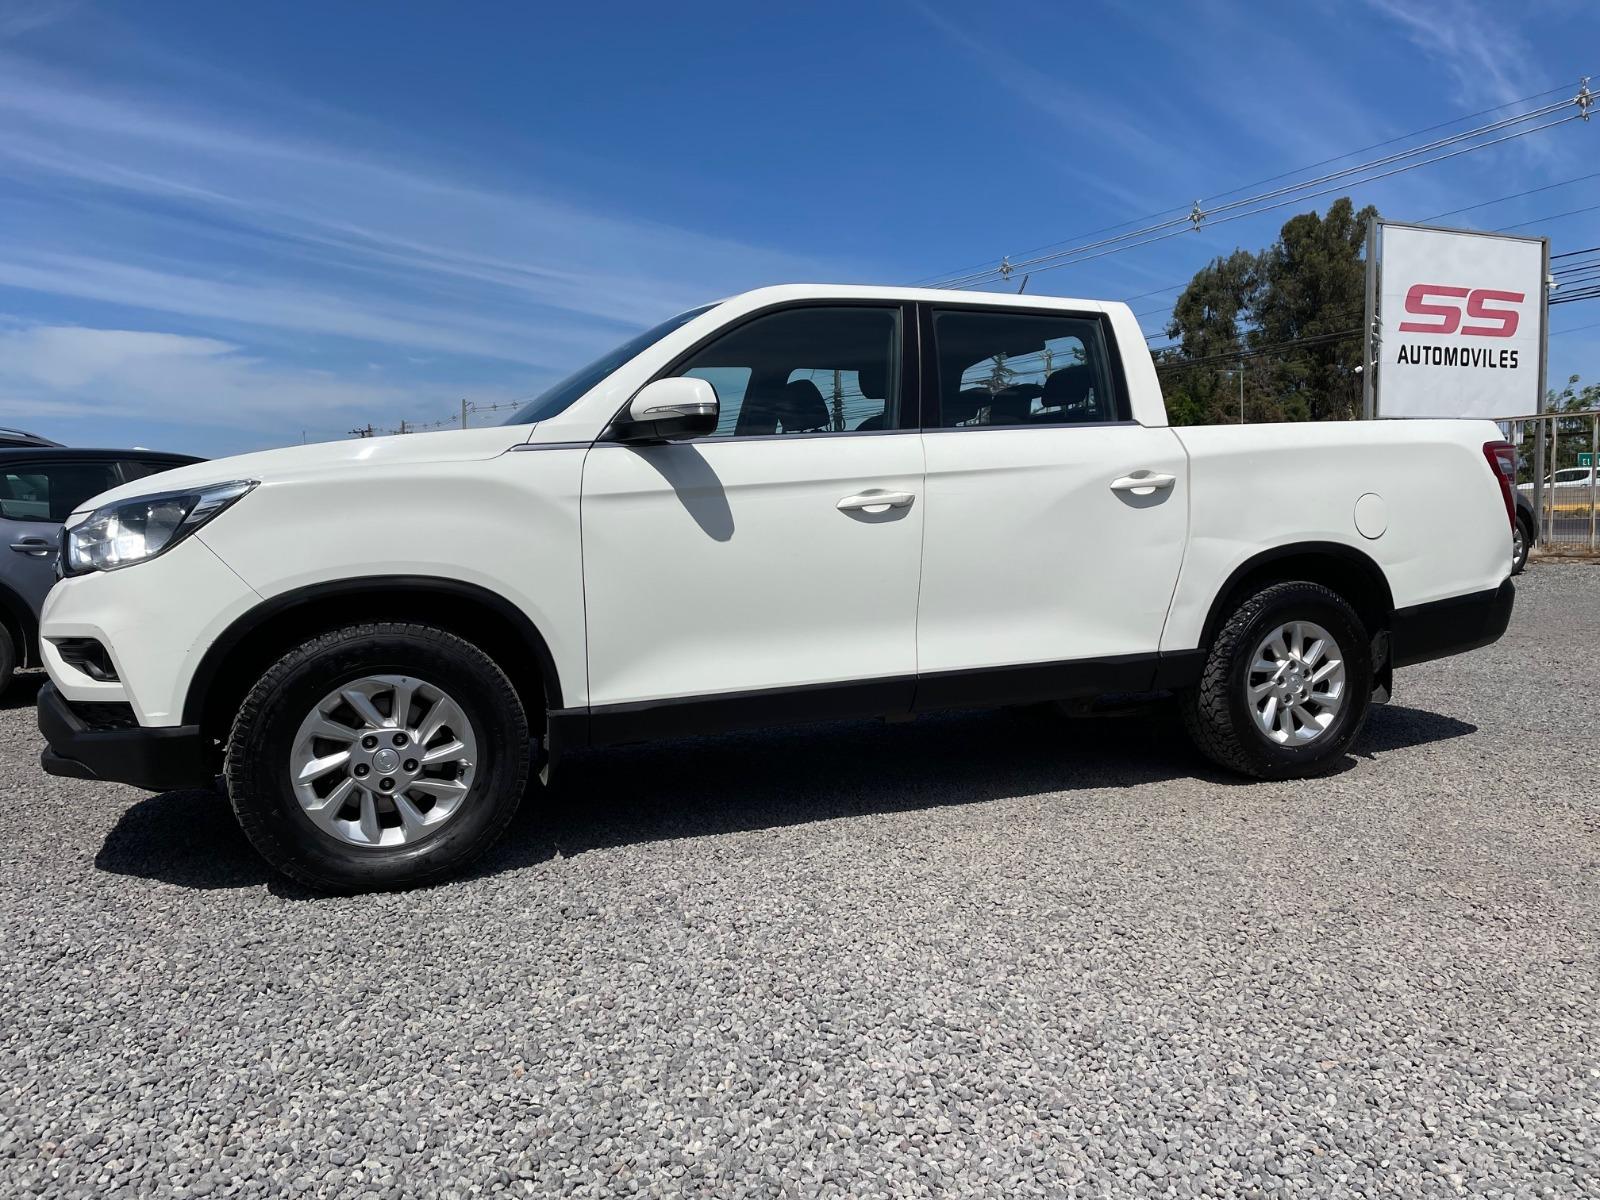 SSANGYONG NEW MUSSO GRAND Grand Musso AT 2021 Camioneta - 